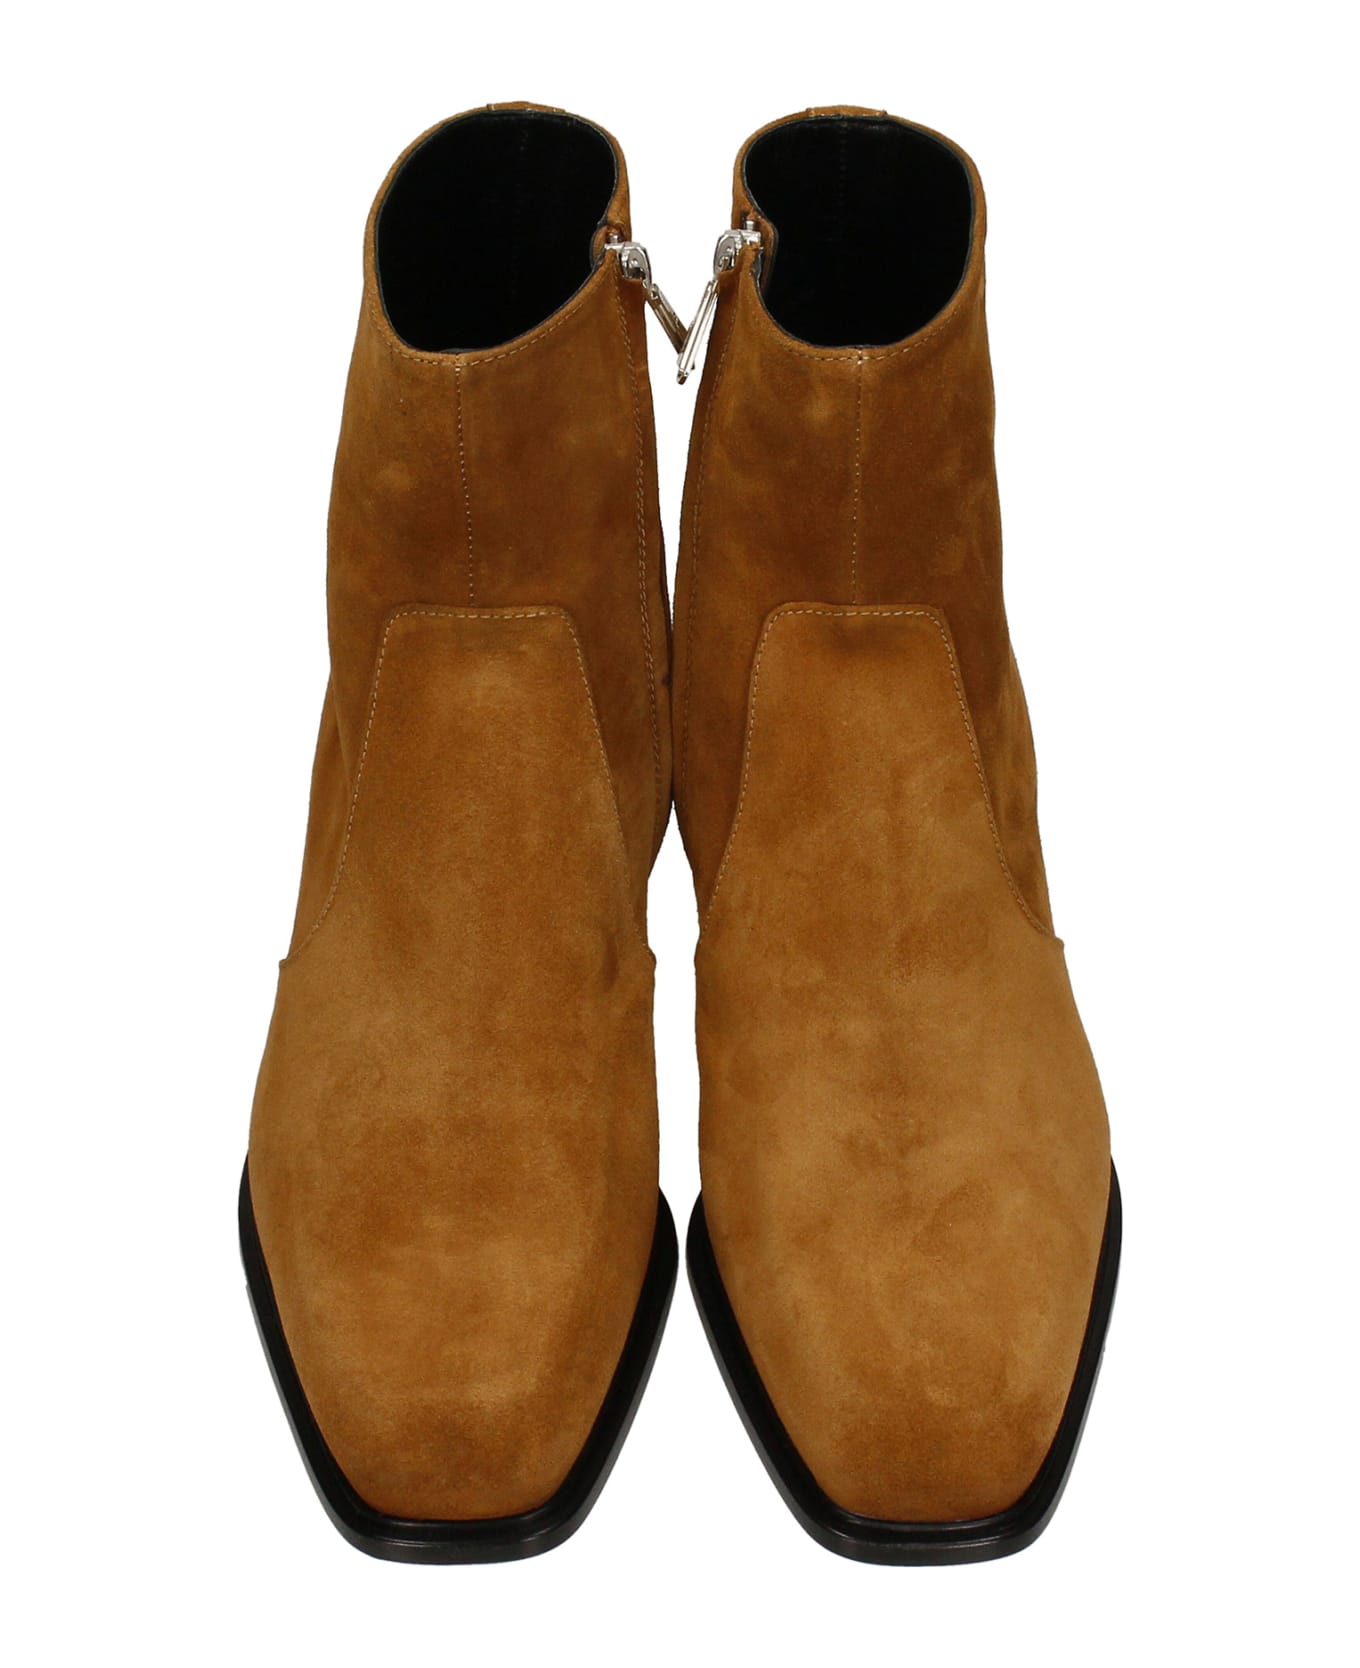 Cesare Paciotti Ankle Boots In Leather Color Suede - leather color